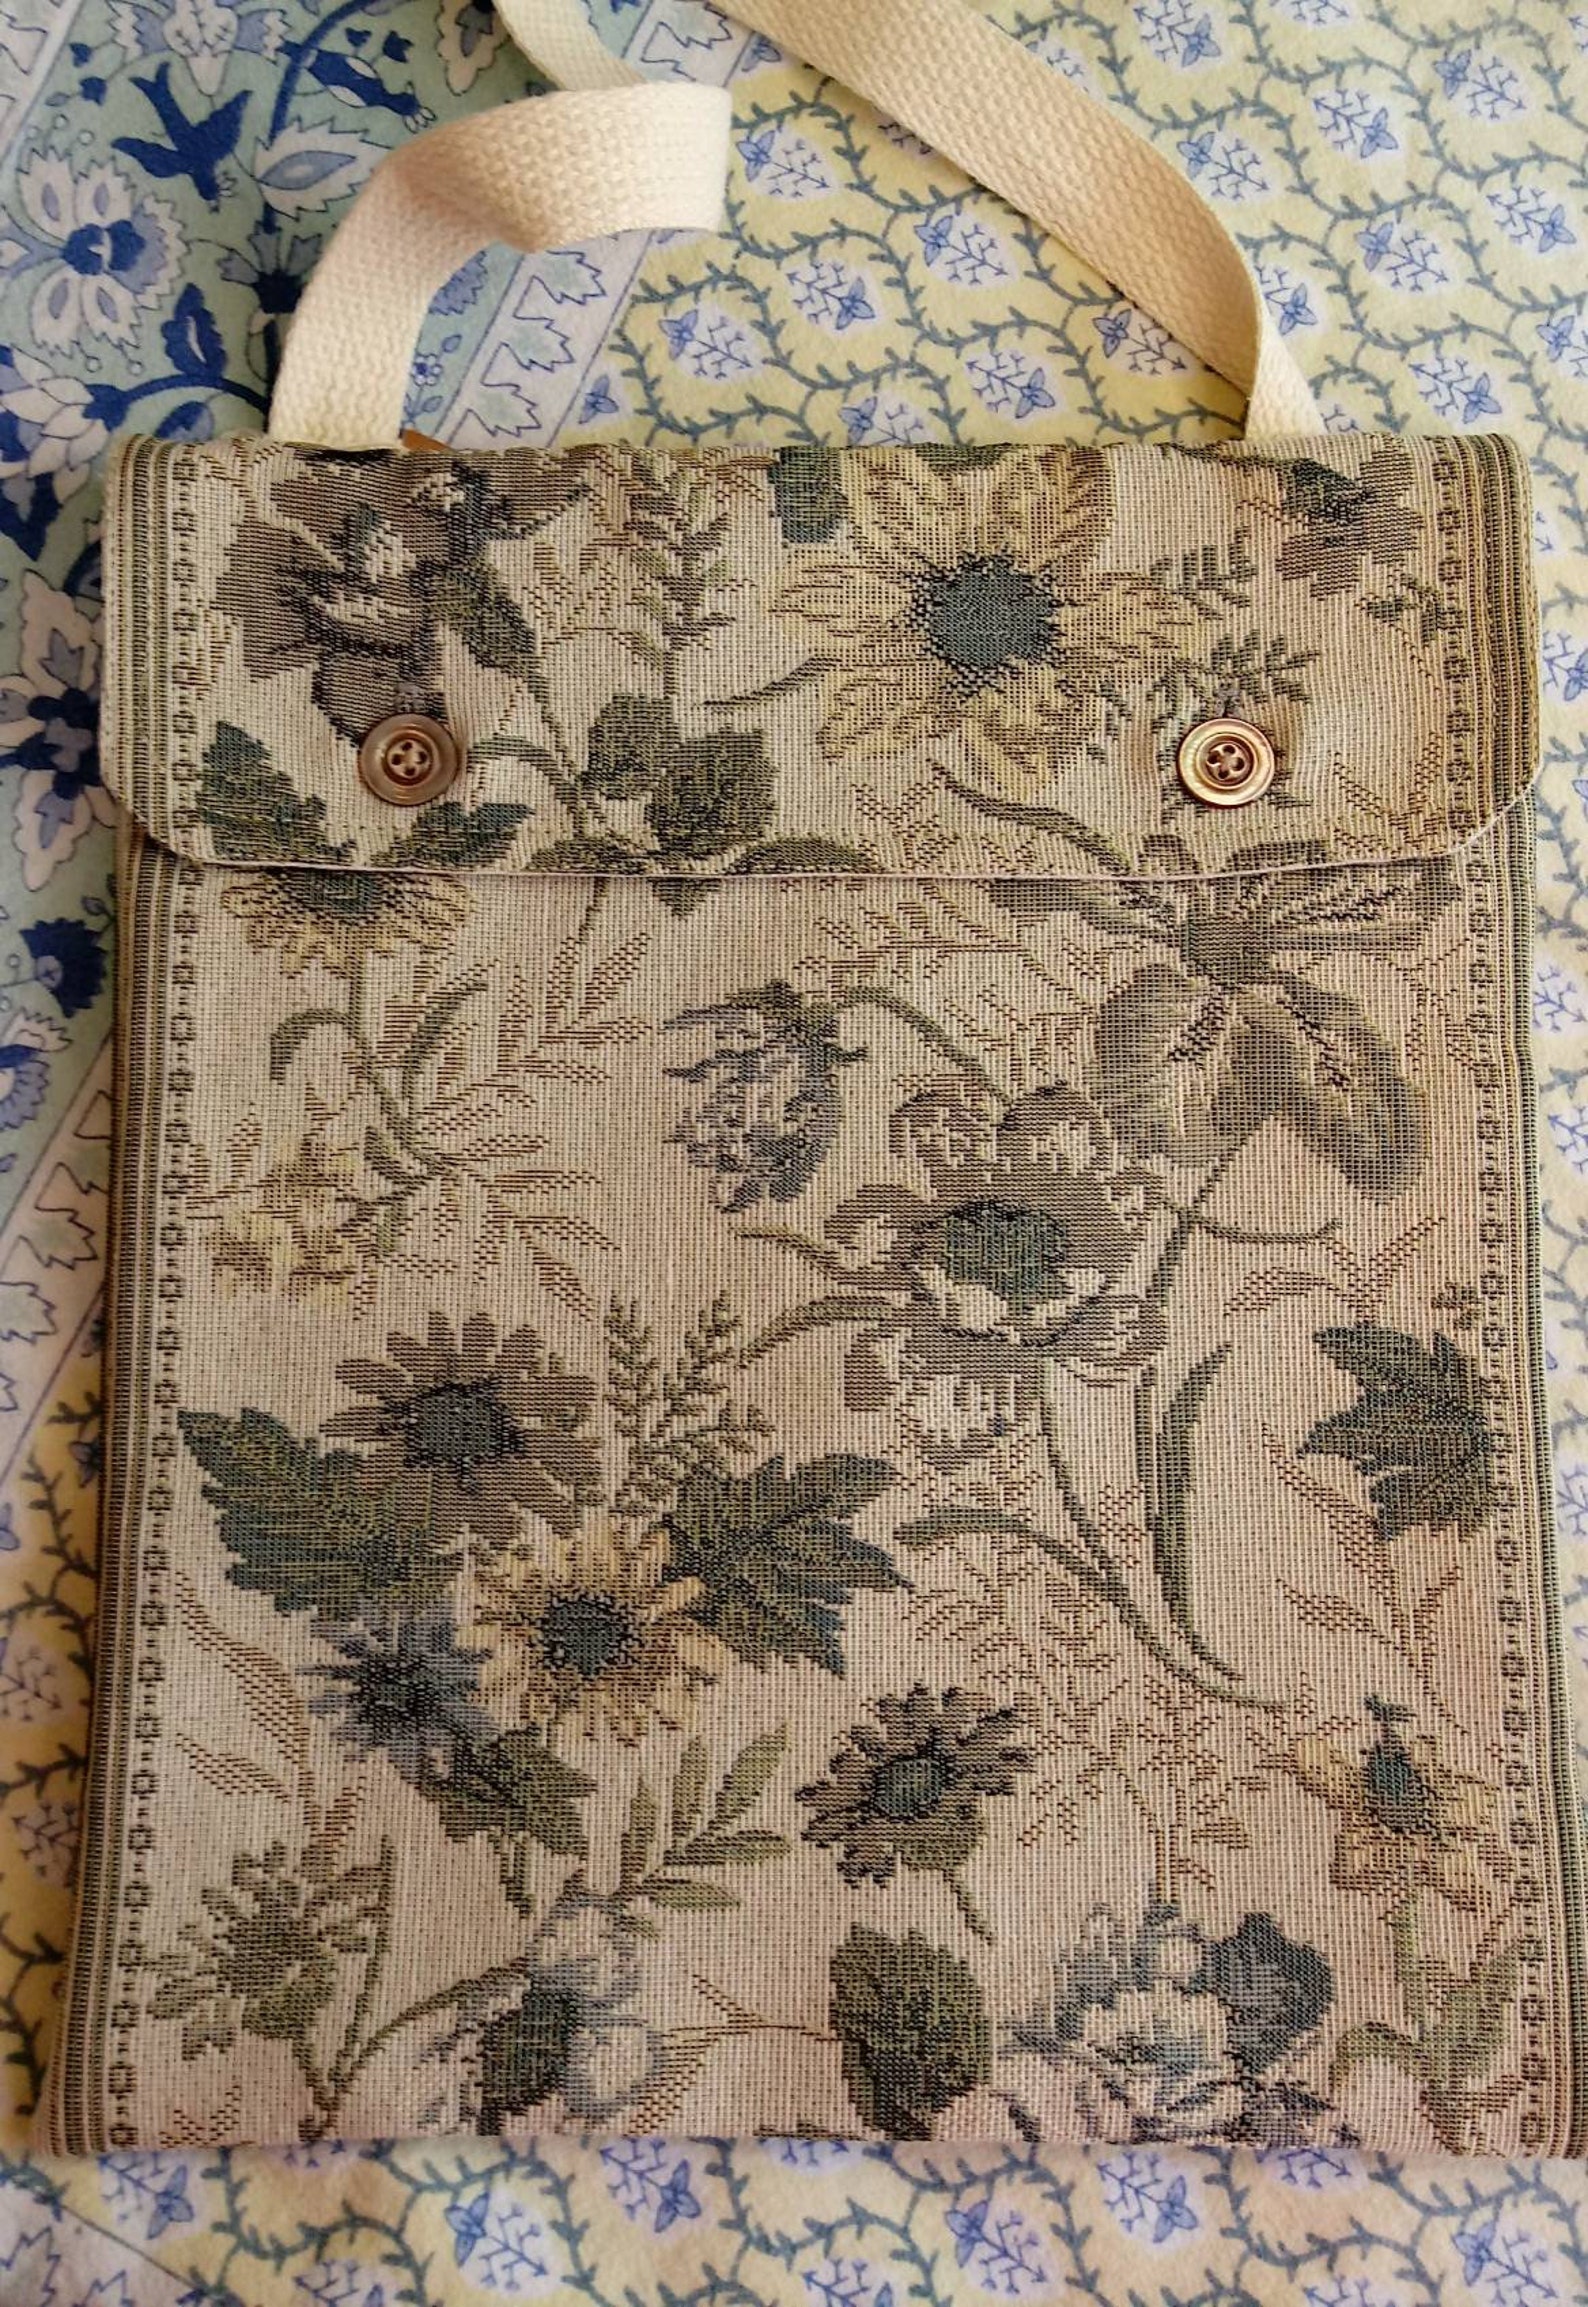 Haversack knapsack 18th-19th century multi color floral fabric | Etsy